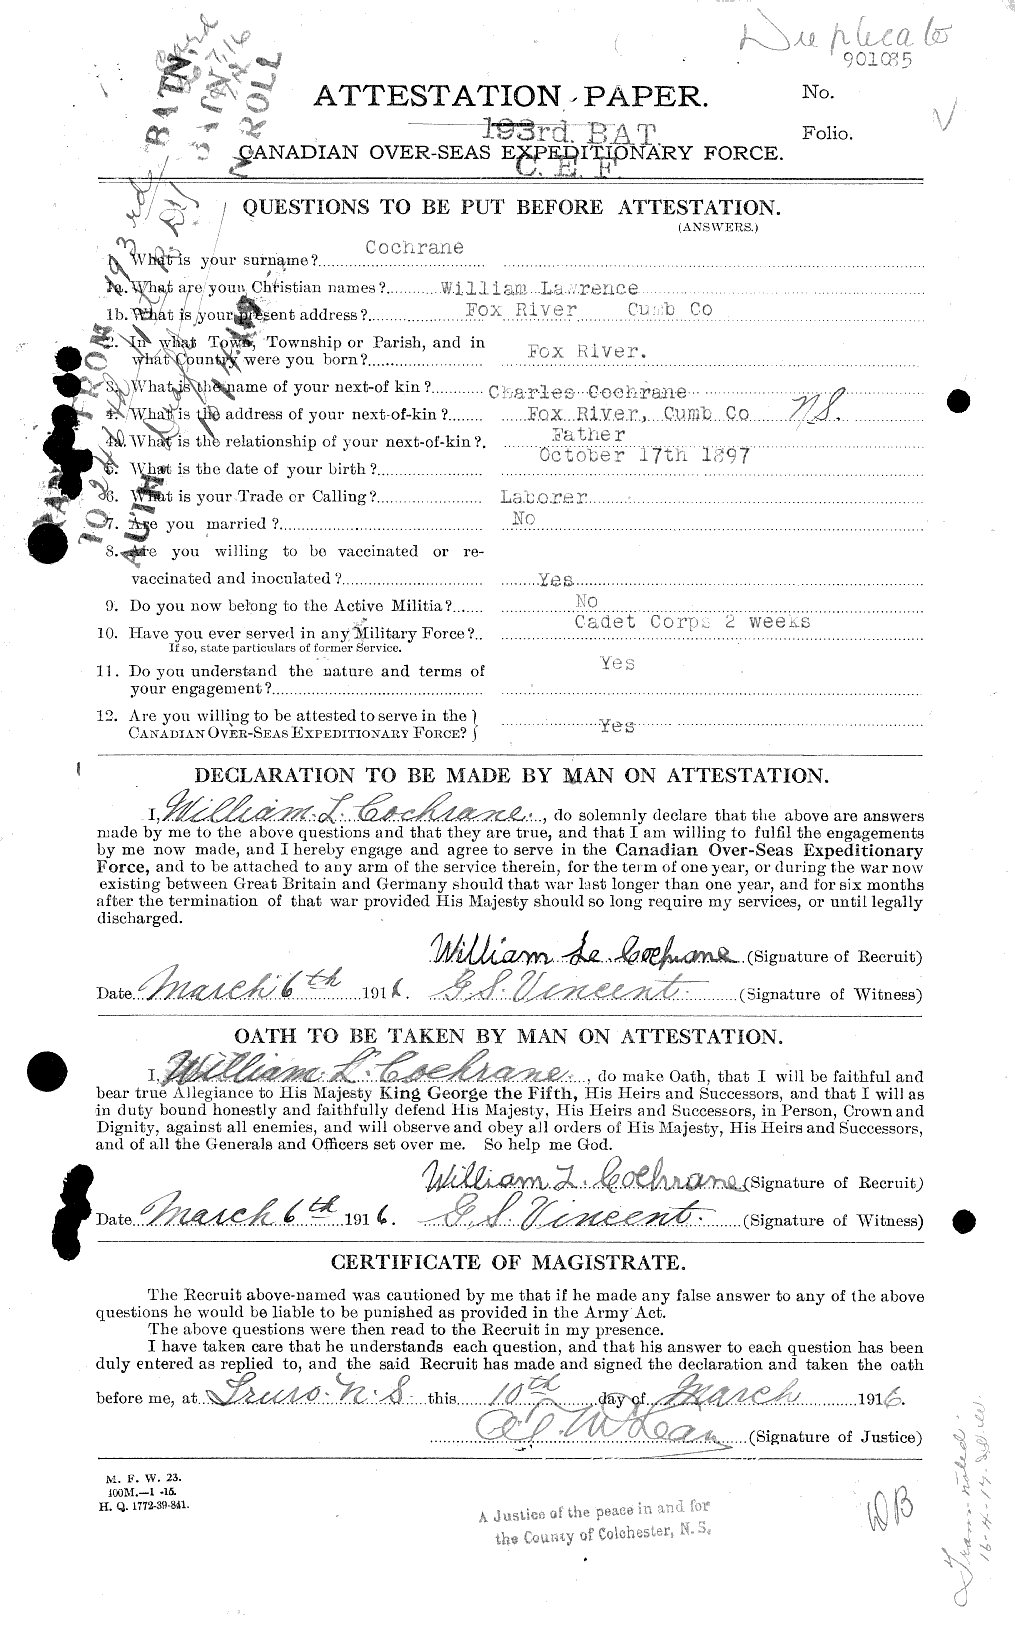 Personnel Records of the First World War - CEF 026511a